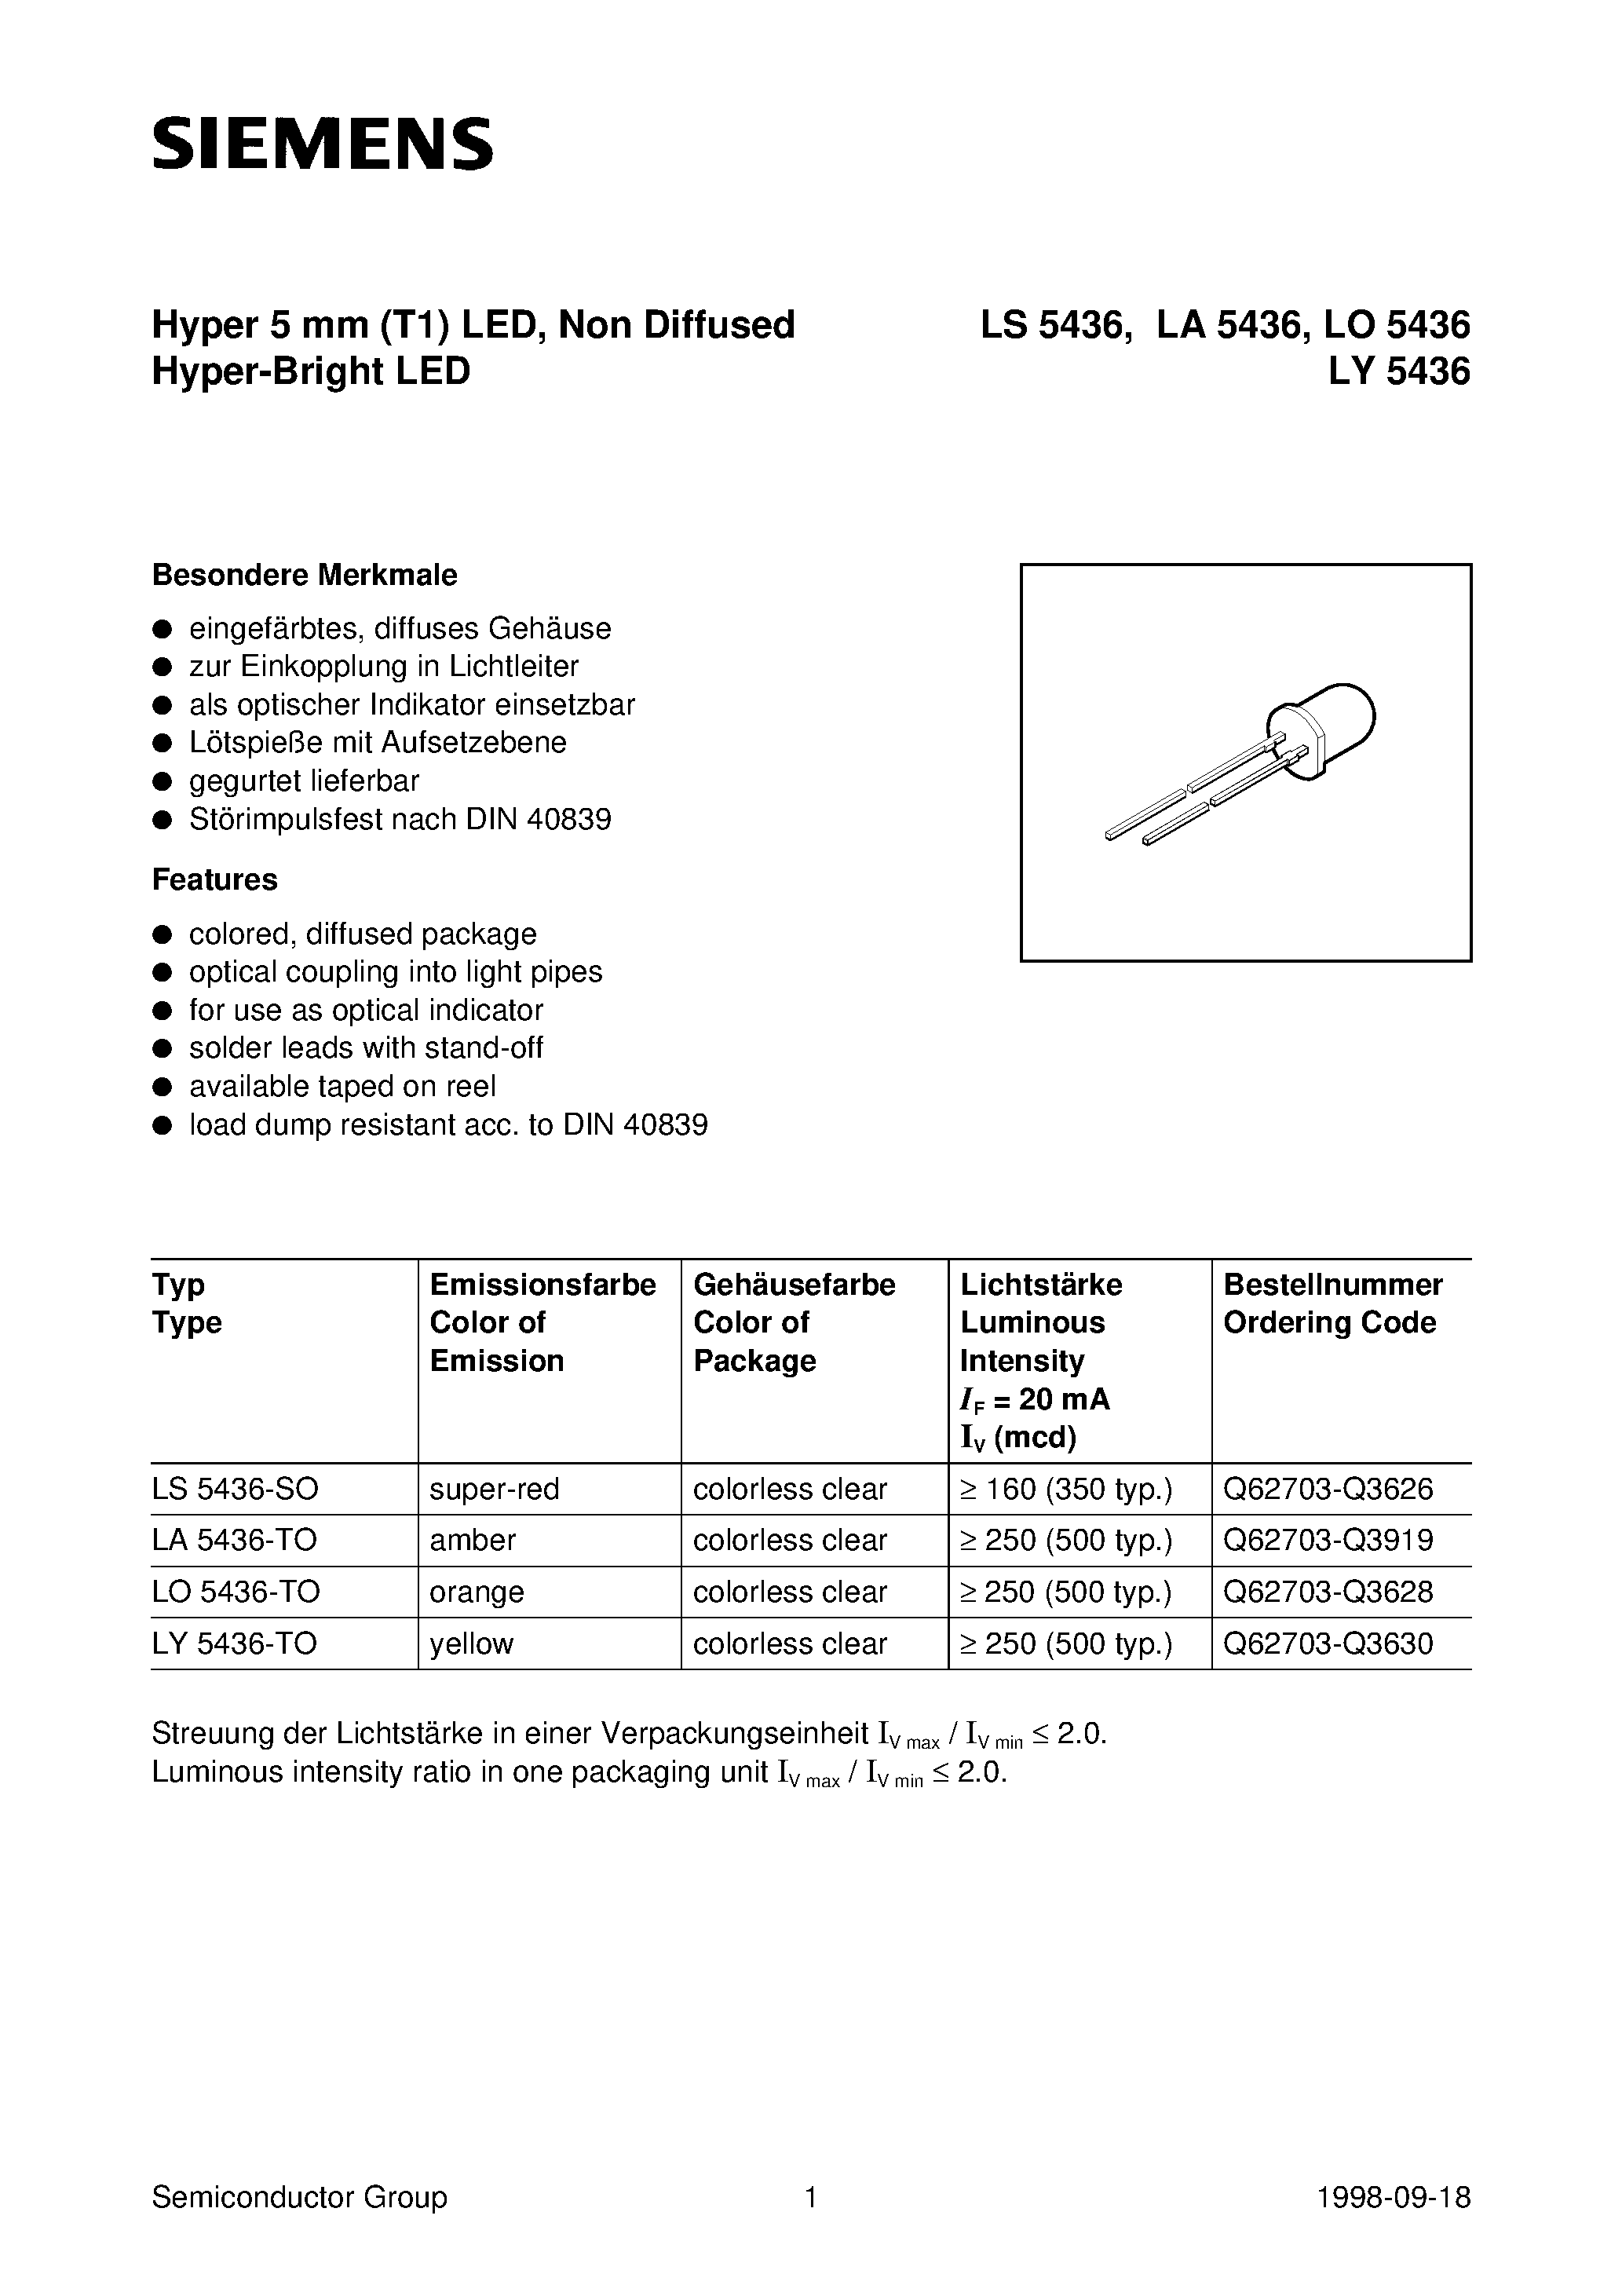 Datasheet LA5436-TO - Hyper 5 mm T1 LED / Non Diffused Hyper-Bright LED page 1